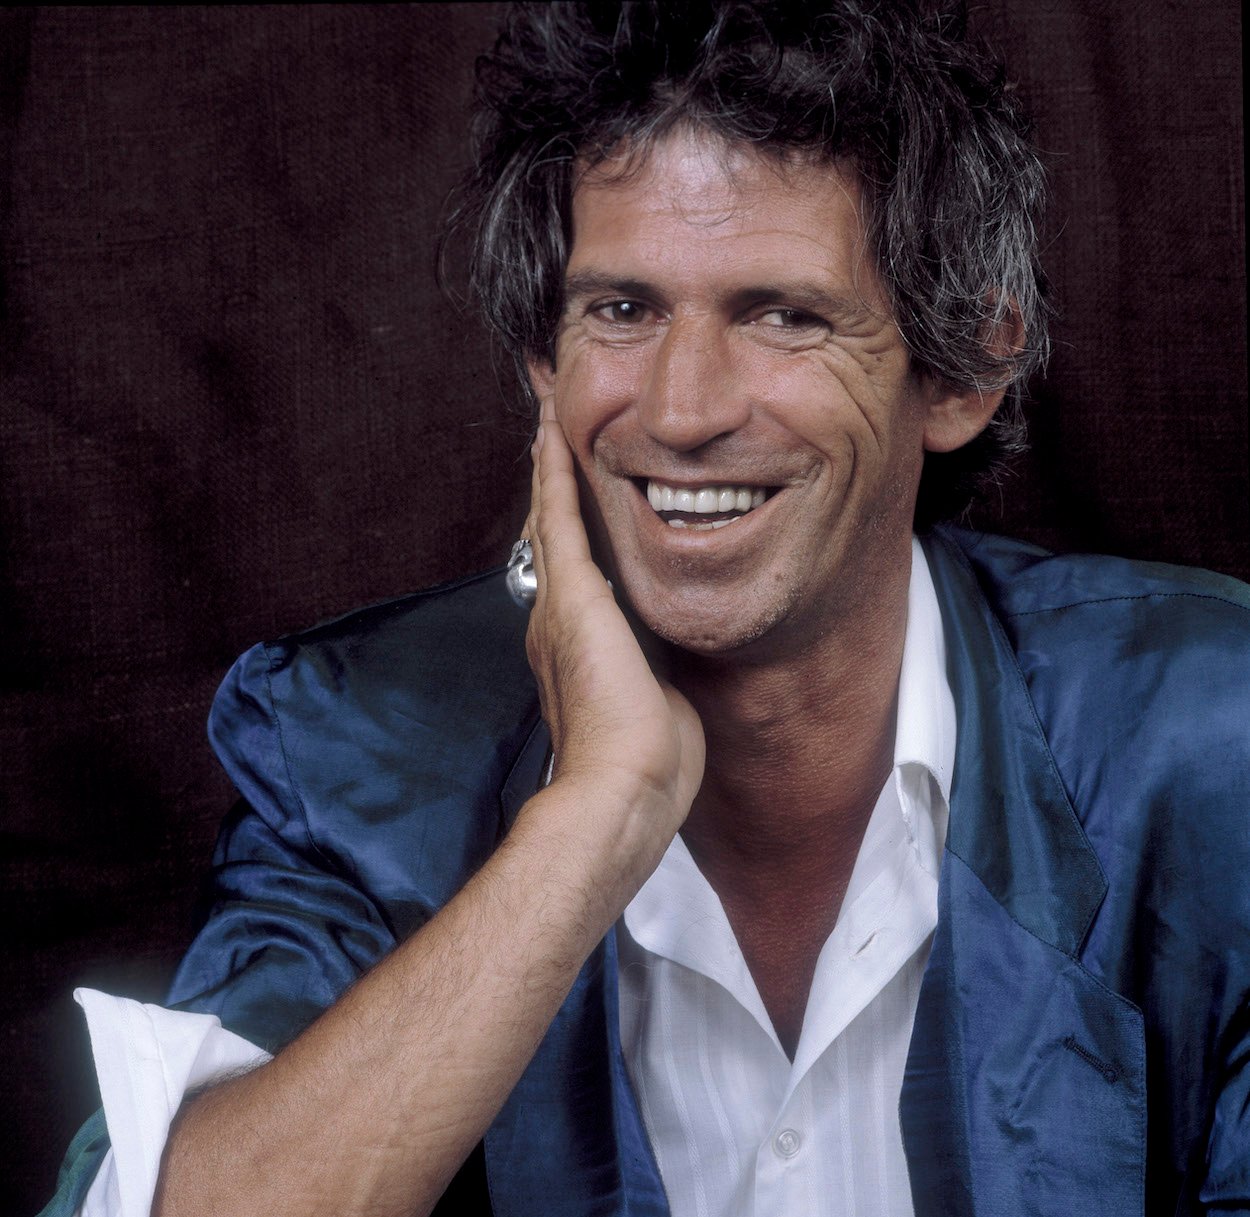 Rolling Stones' guitarist Keith Richards, who once said the band made one of the easiest decisions of their career in 1975.